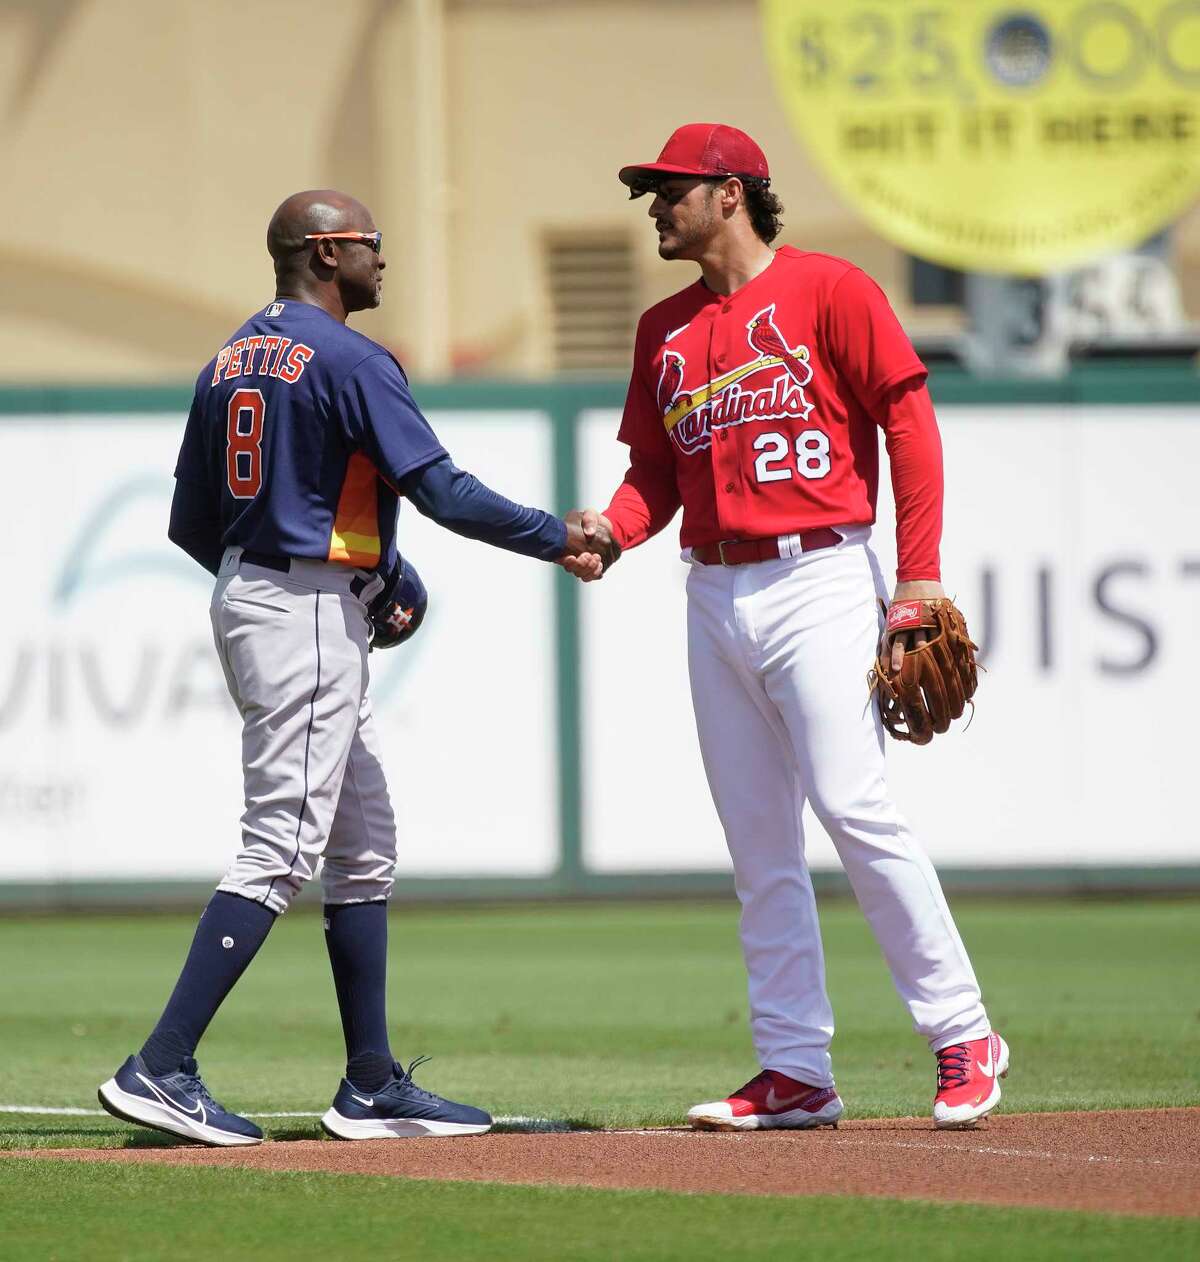 Astros third base coach Gary Pettis is greeted by Cardinals third baseman Nolan Arenado before the start of the first inning of Friday's spring training game at Roger Dean Chevrolet Stadium in Jupiter, Fla.